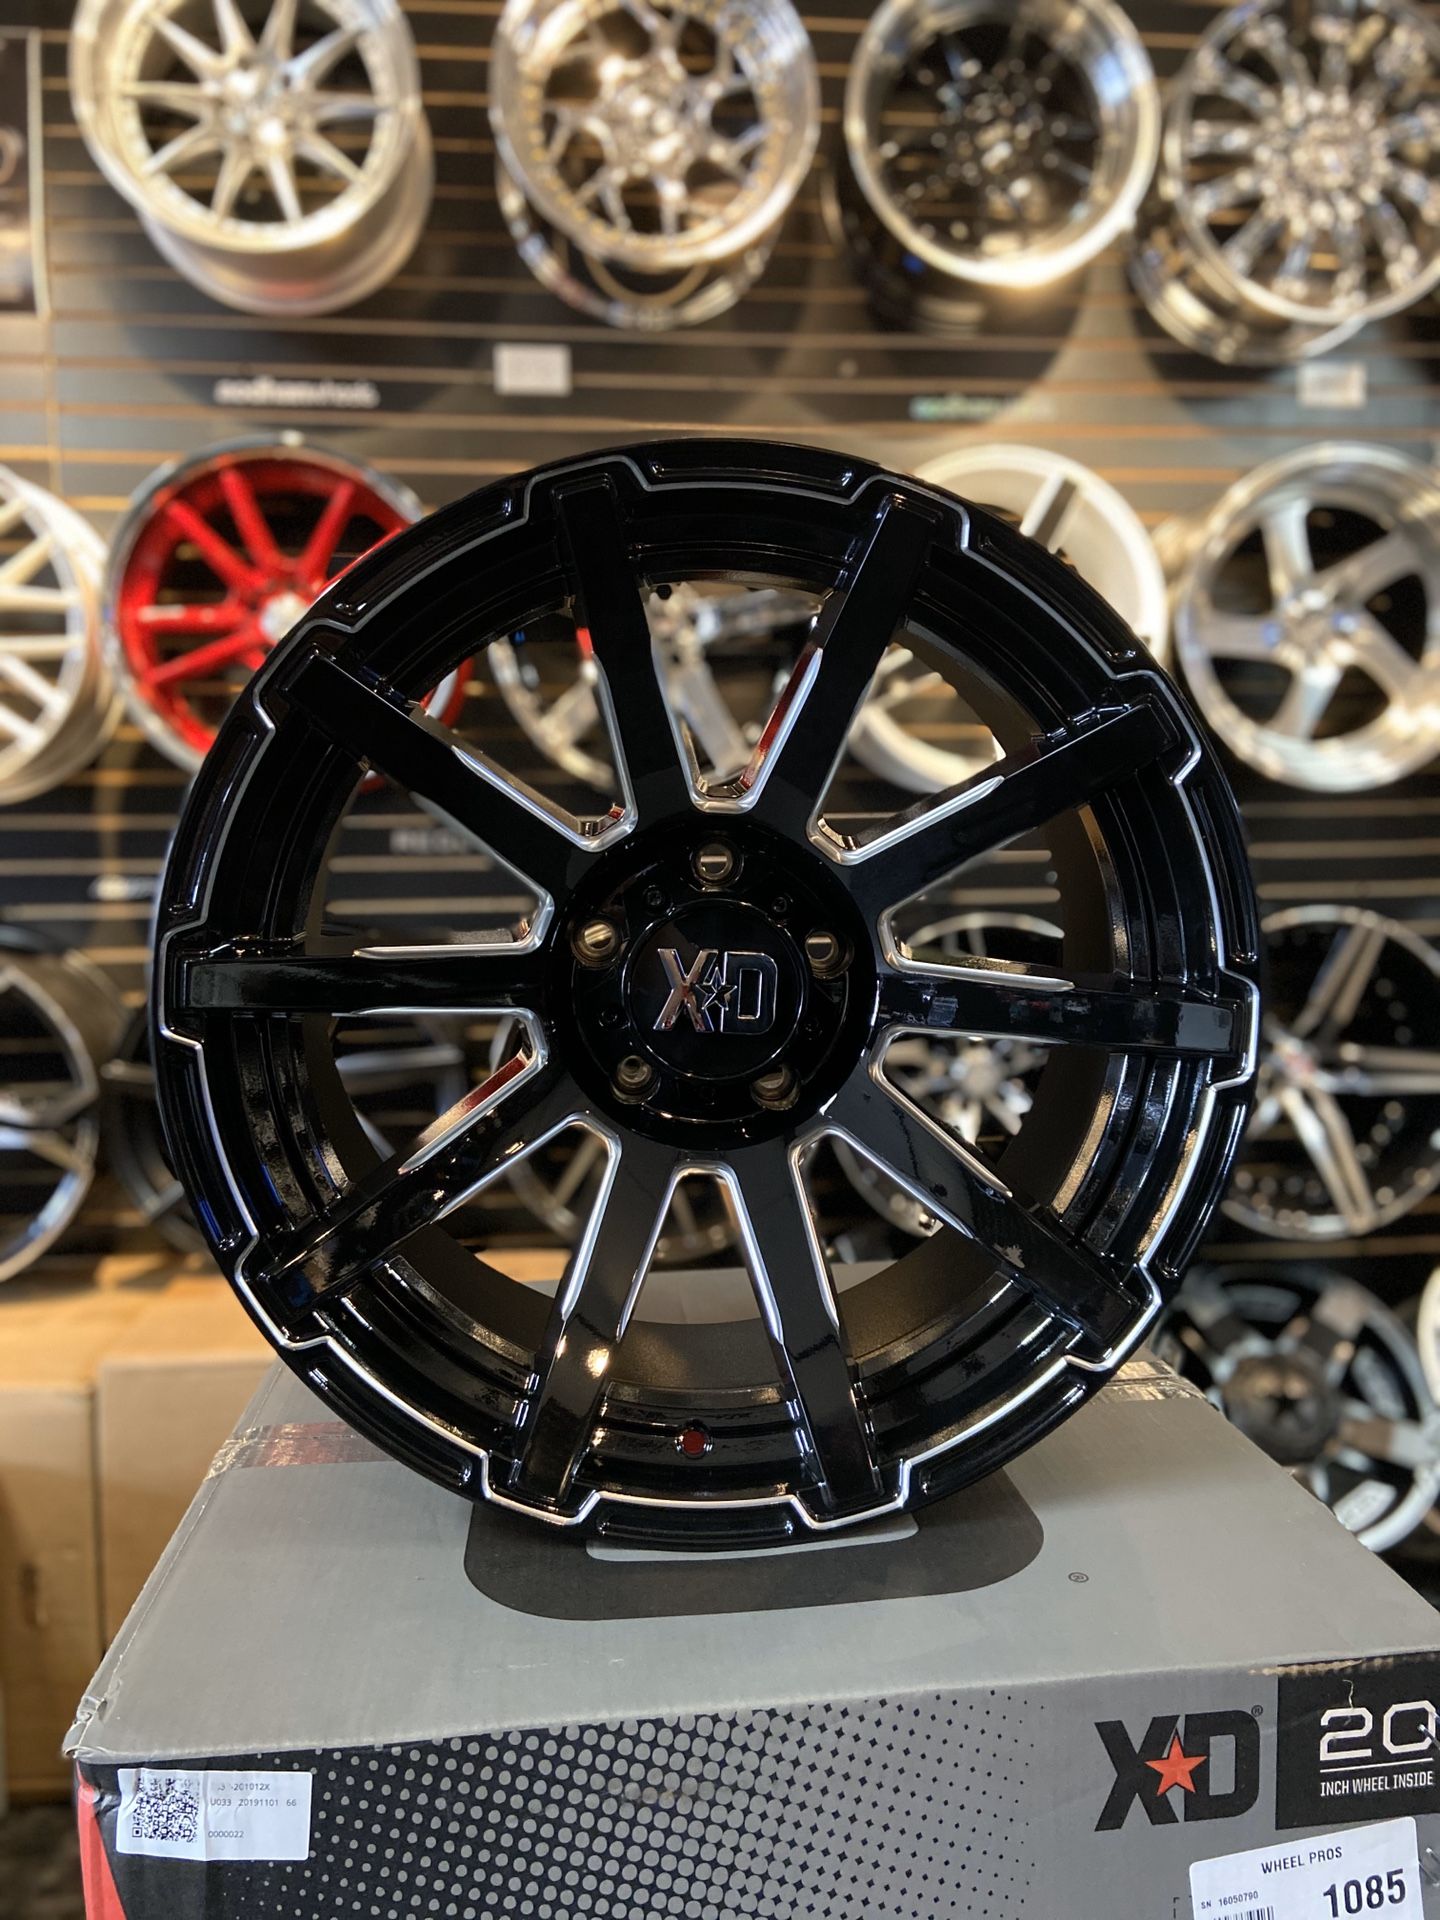 New Xd off-road rims in stock no credit check financing available only $50 down payment